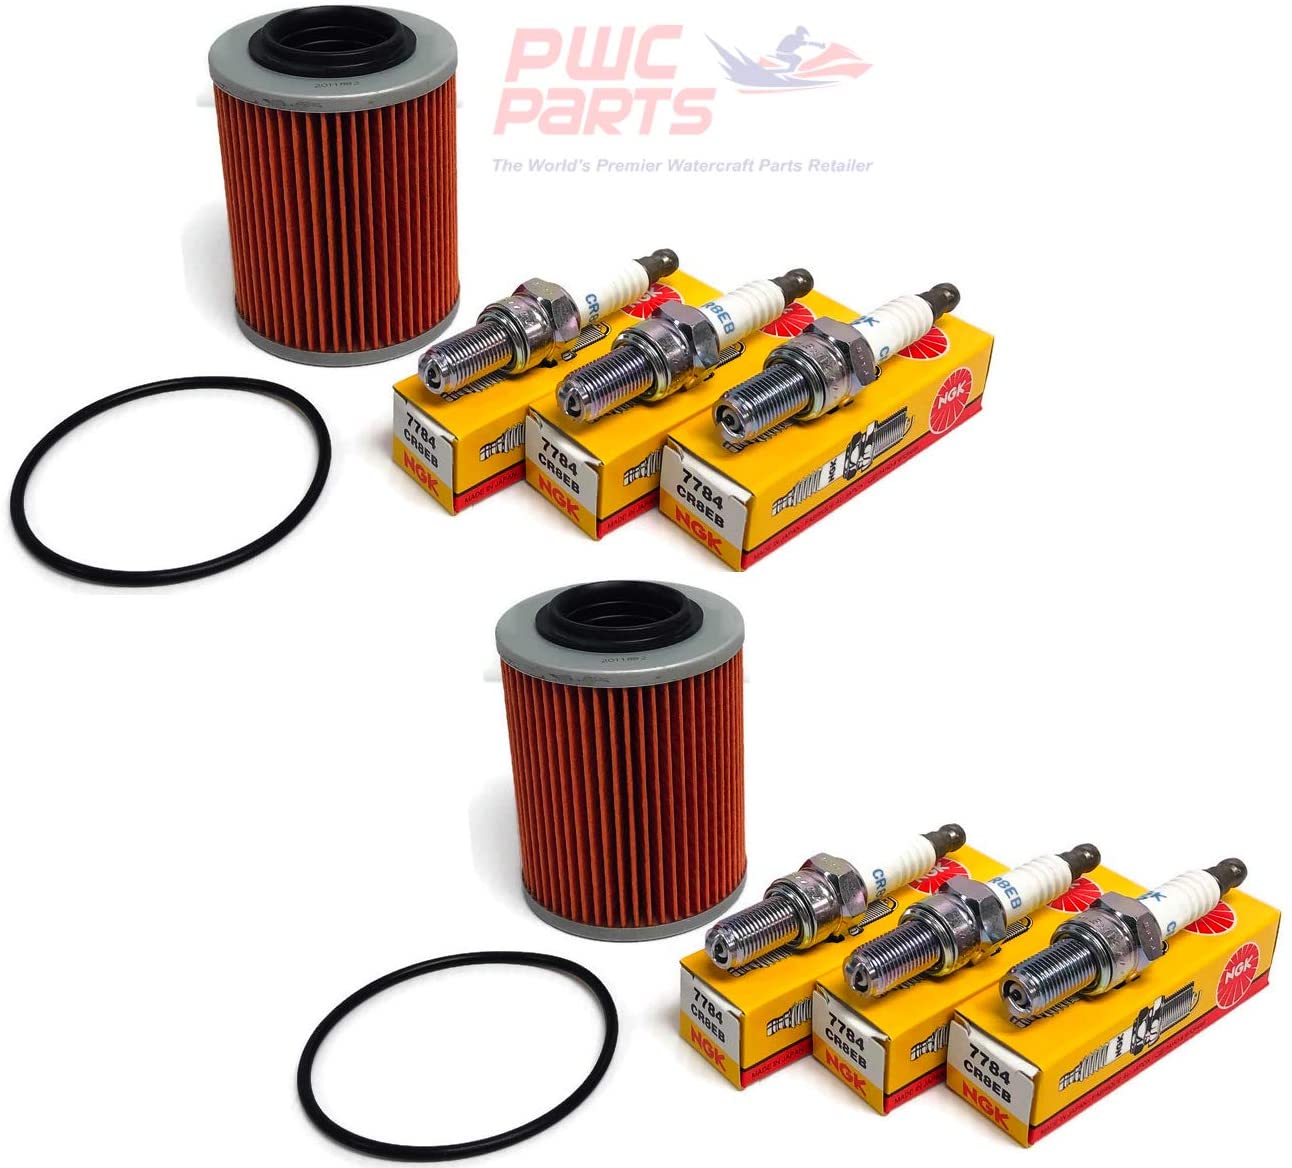 2x SeaDoo SPARK Oil Filter and O-Ring with NGK Spark Plug Set CR8EB 2014+ 2-Up 3-Up TRIXX ACE 900 2017+ GTI GTS 900 Repl 420956123 420650500